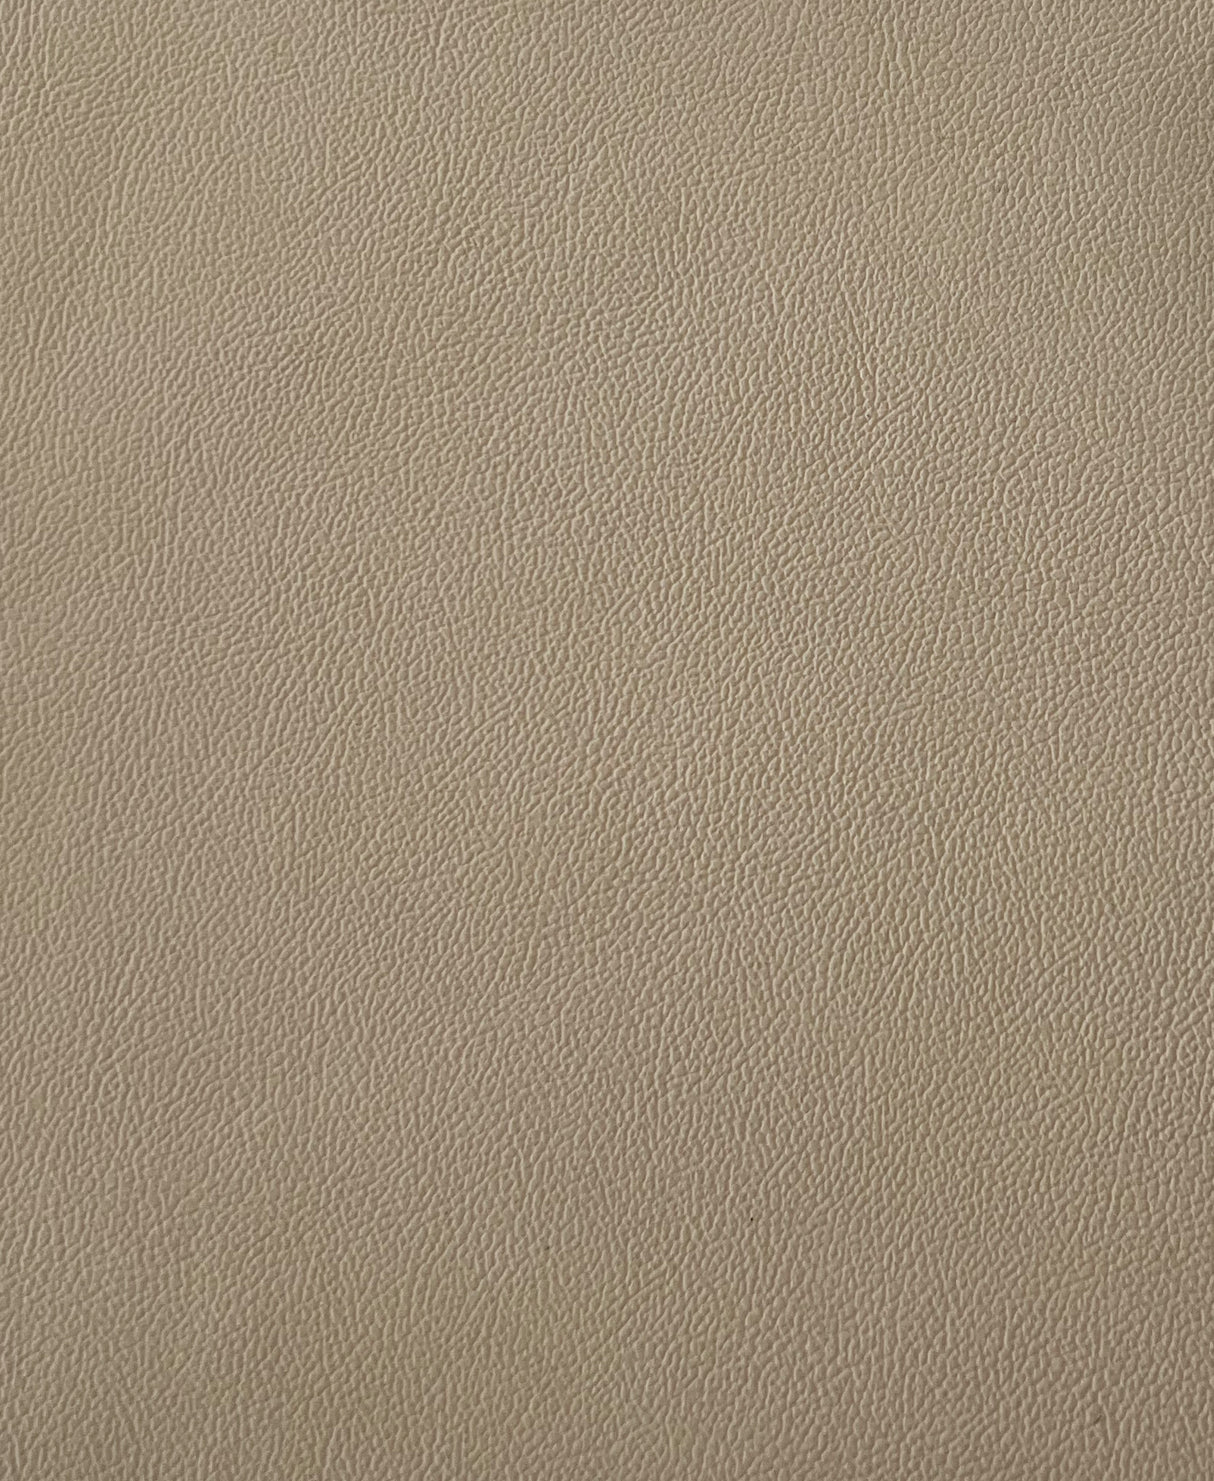 1 Hide of Camel Soho Leather 2009 Ford ($6.99/SqFt)